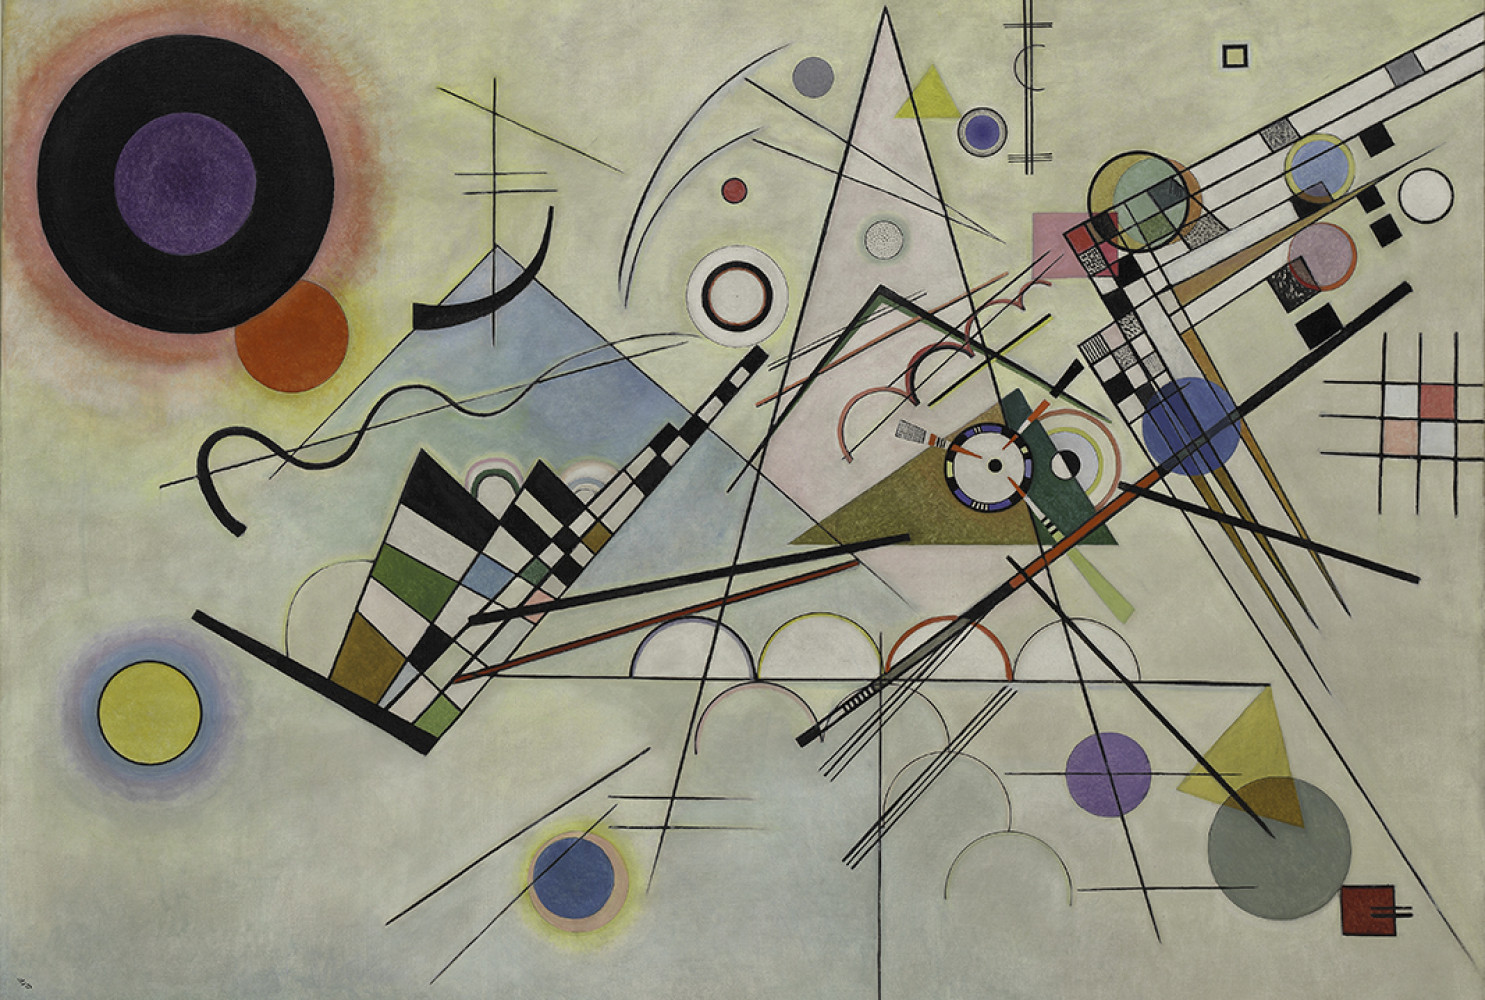 Composition 8, July 1923, by Vasily Kandinsky (1866-1944); oil on canvas; 55 1/8 x 79 1/8 inches; Courtesy of the Solomon R. Guggenheim Museum, New York © 2016 Artists Rights Society (ARS), New York / ADAGP